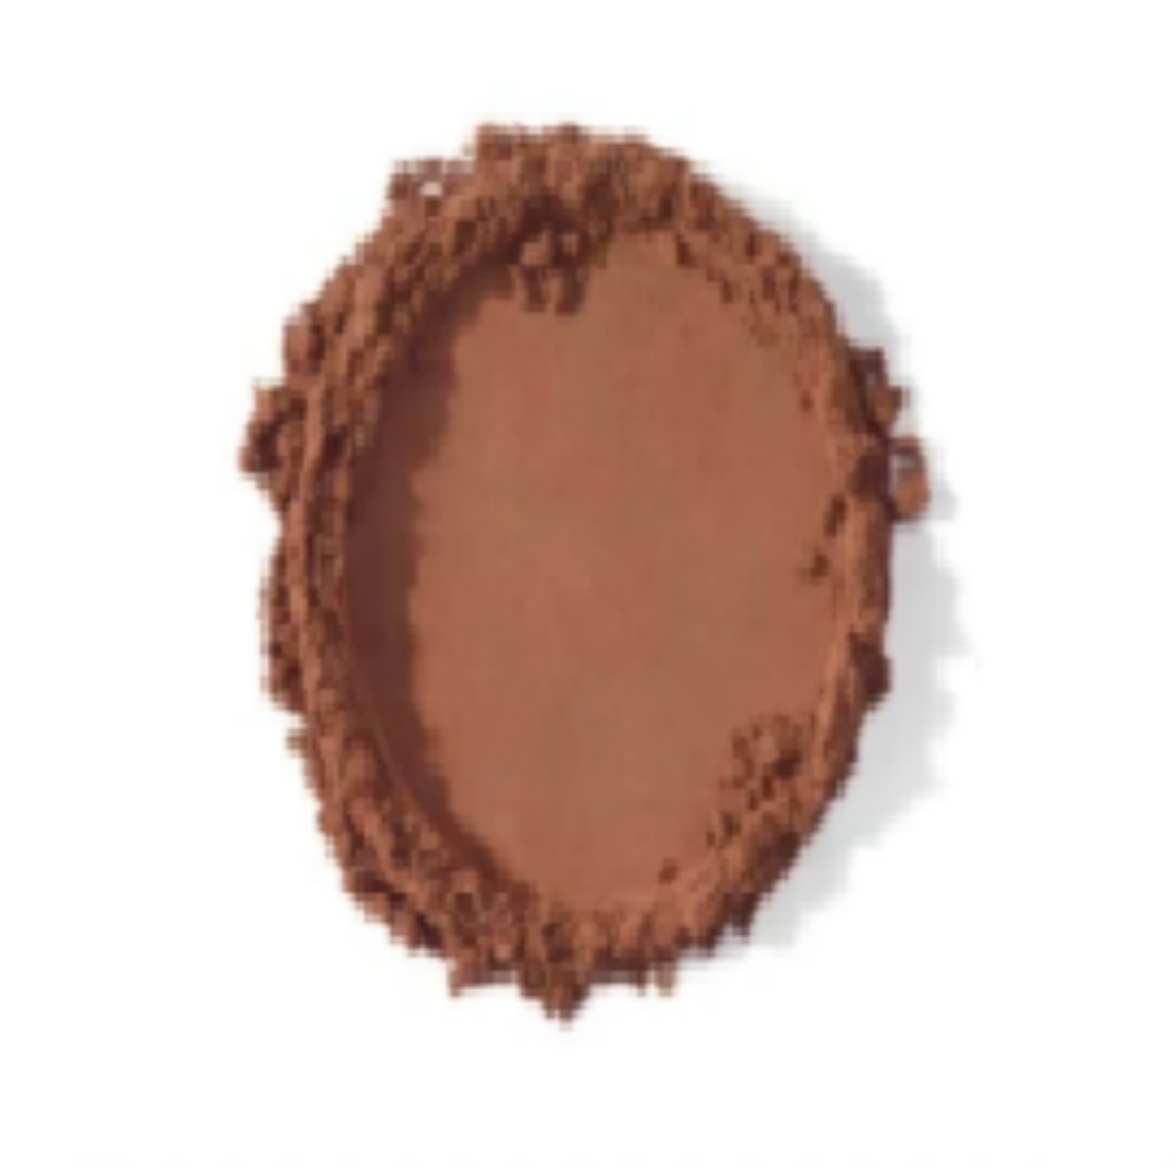 Picture of 25KG 350-DP11 LIGHT COCOA POWDER (10-12% FAT)